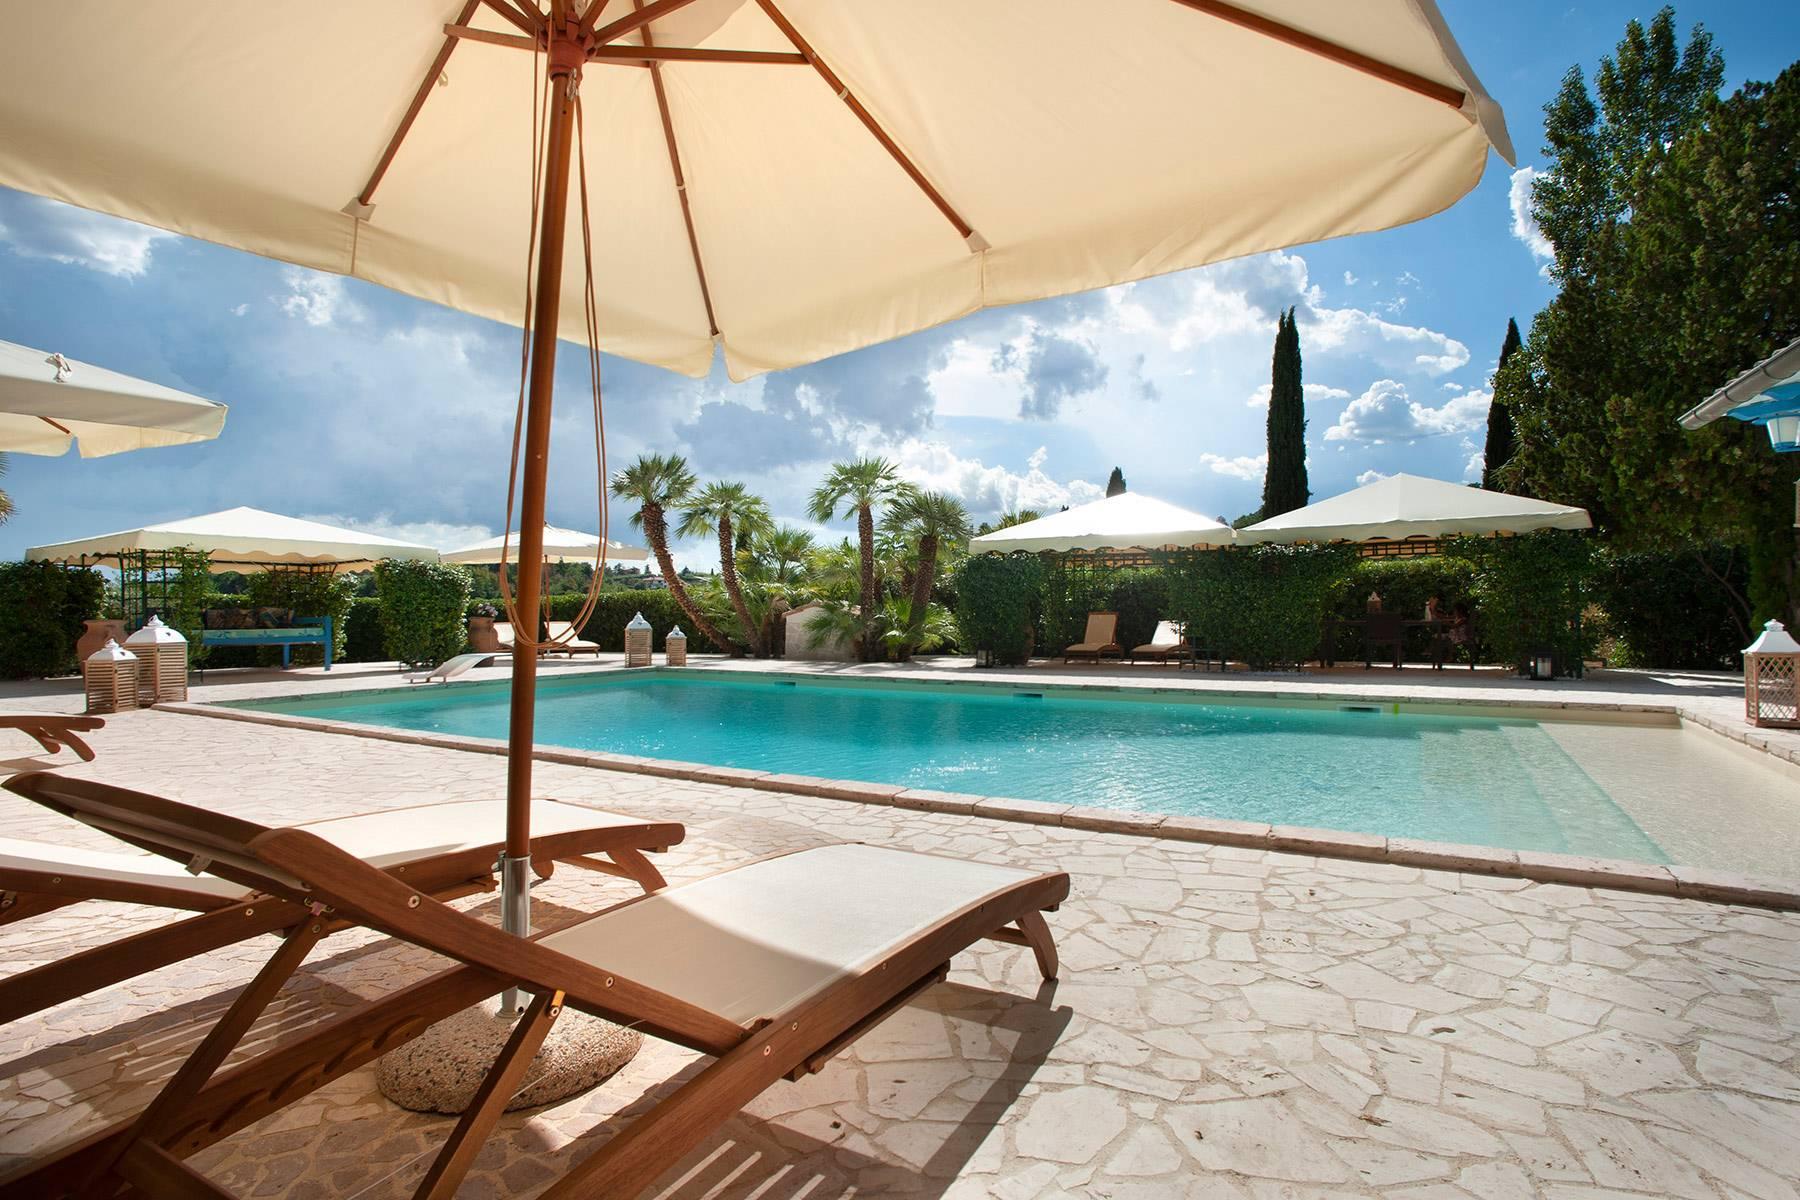 Villa Nayara - Lovely mansion with swimming pool 30 minutes from Rome - 7